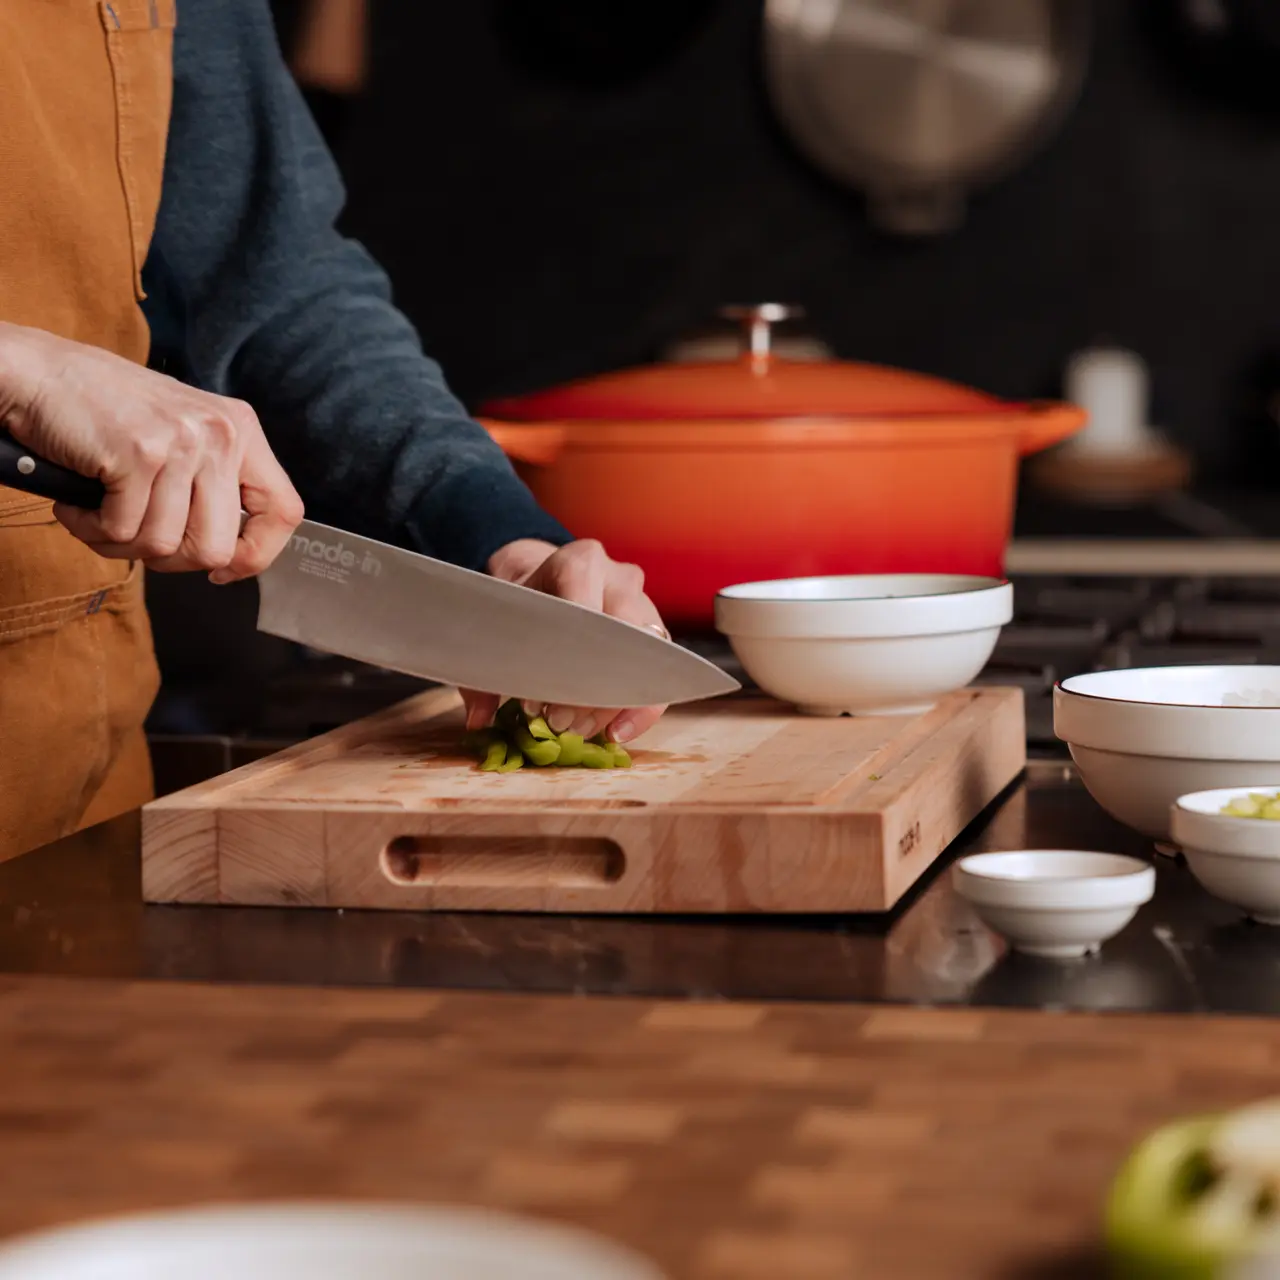 A person is chopping vegetables on a wooden cutting board in a kitchen setting.